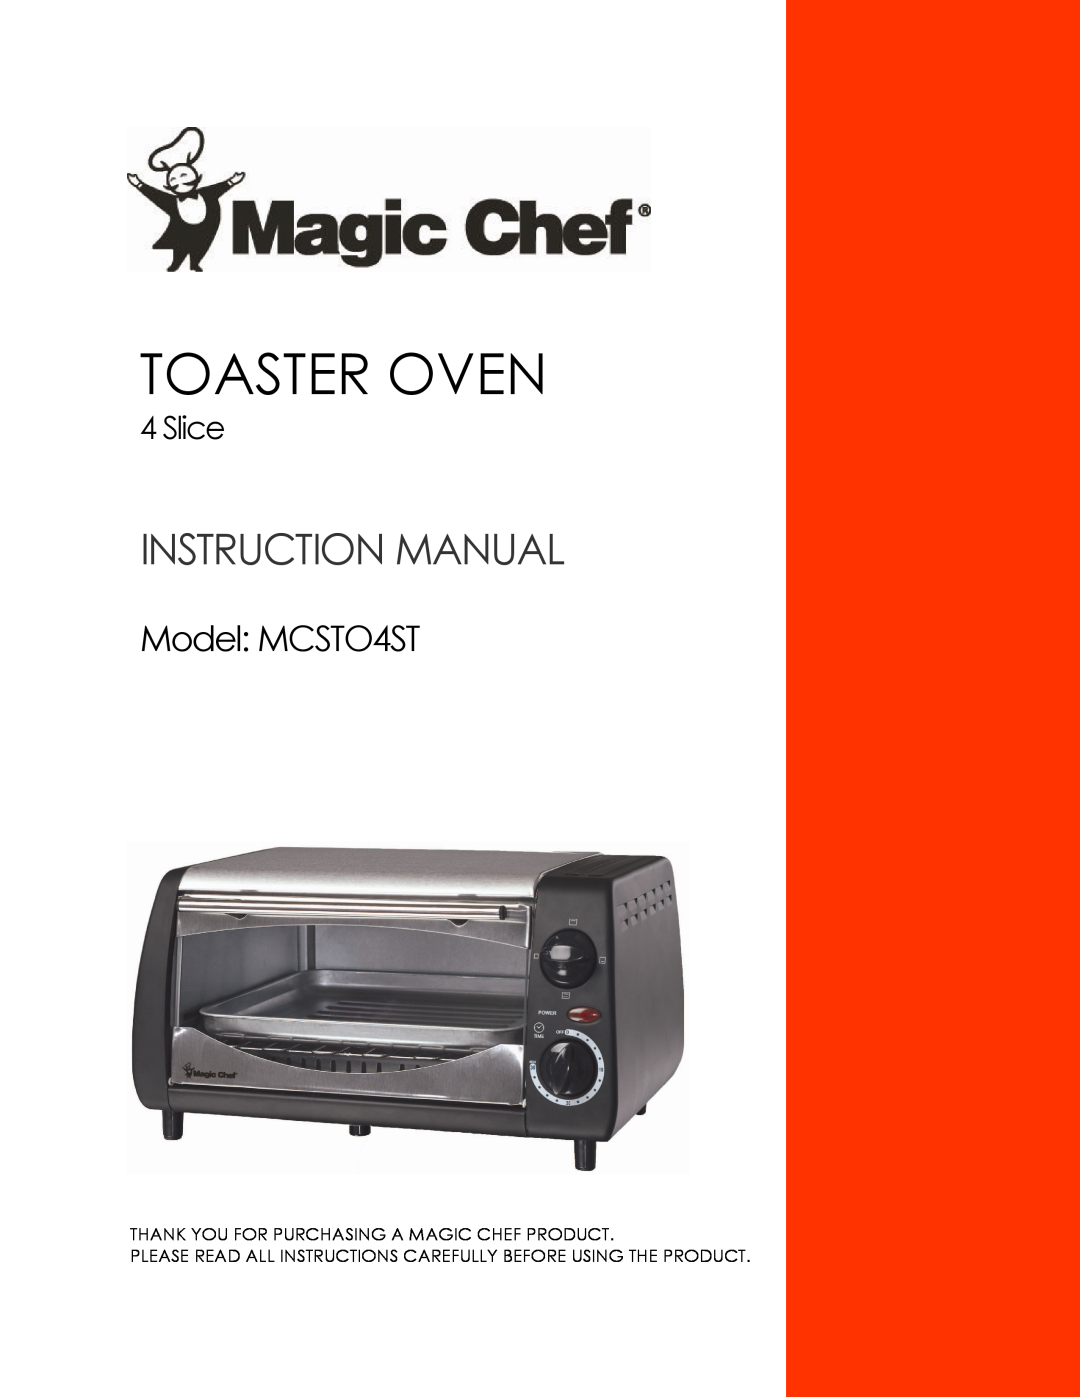 Magic Chef instruction manual Toaster Oven, MODEL MCSTO4ST, Slice, Thank You For Purchasing A Magic Chef Product 